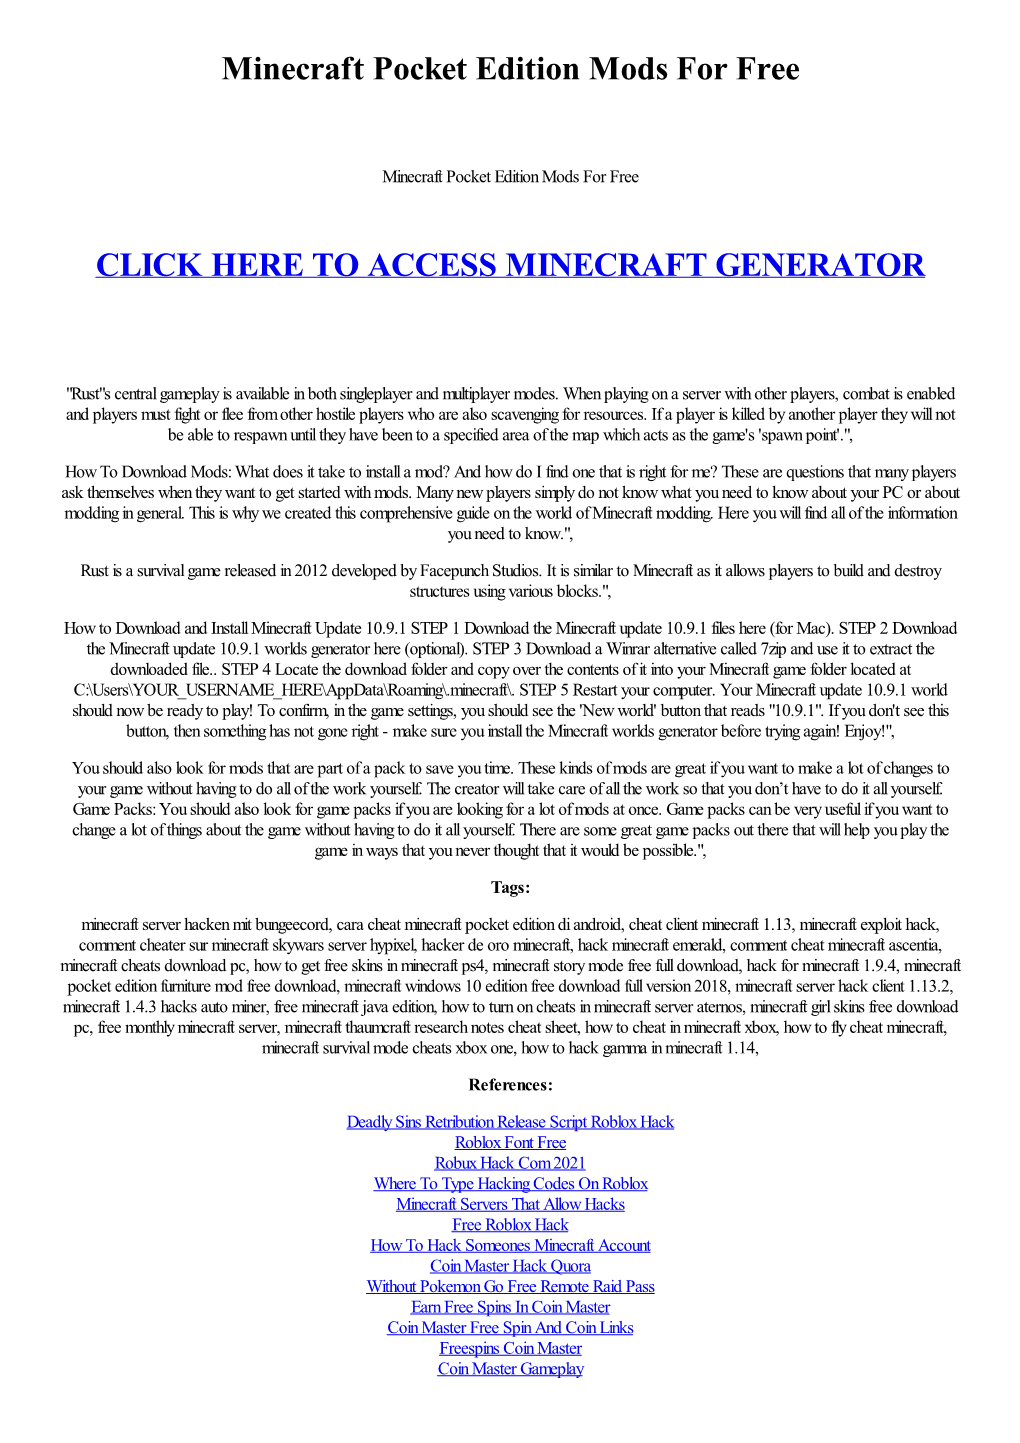 Minecraft Pocket Edition Mods for Free